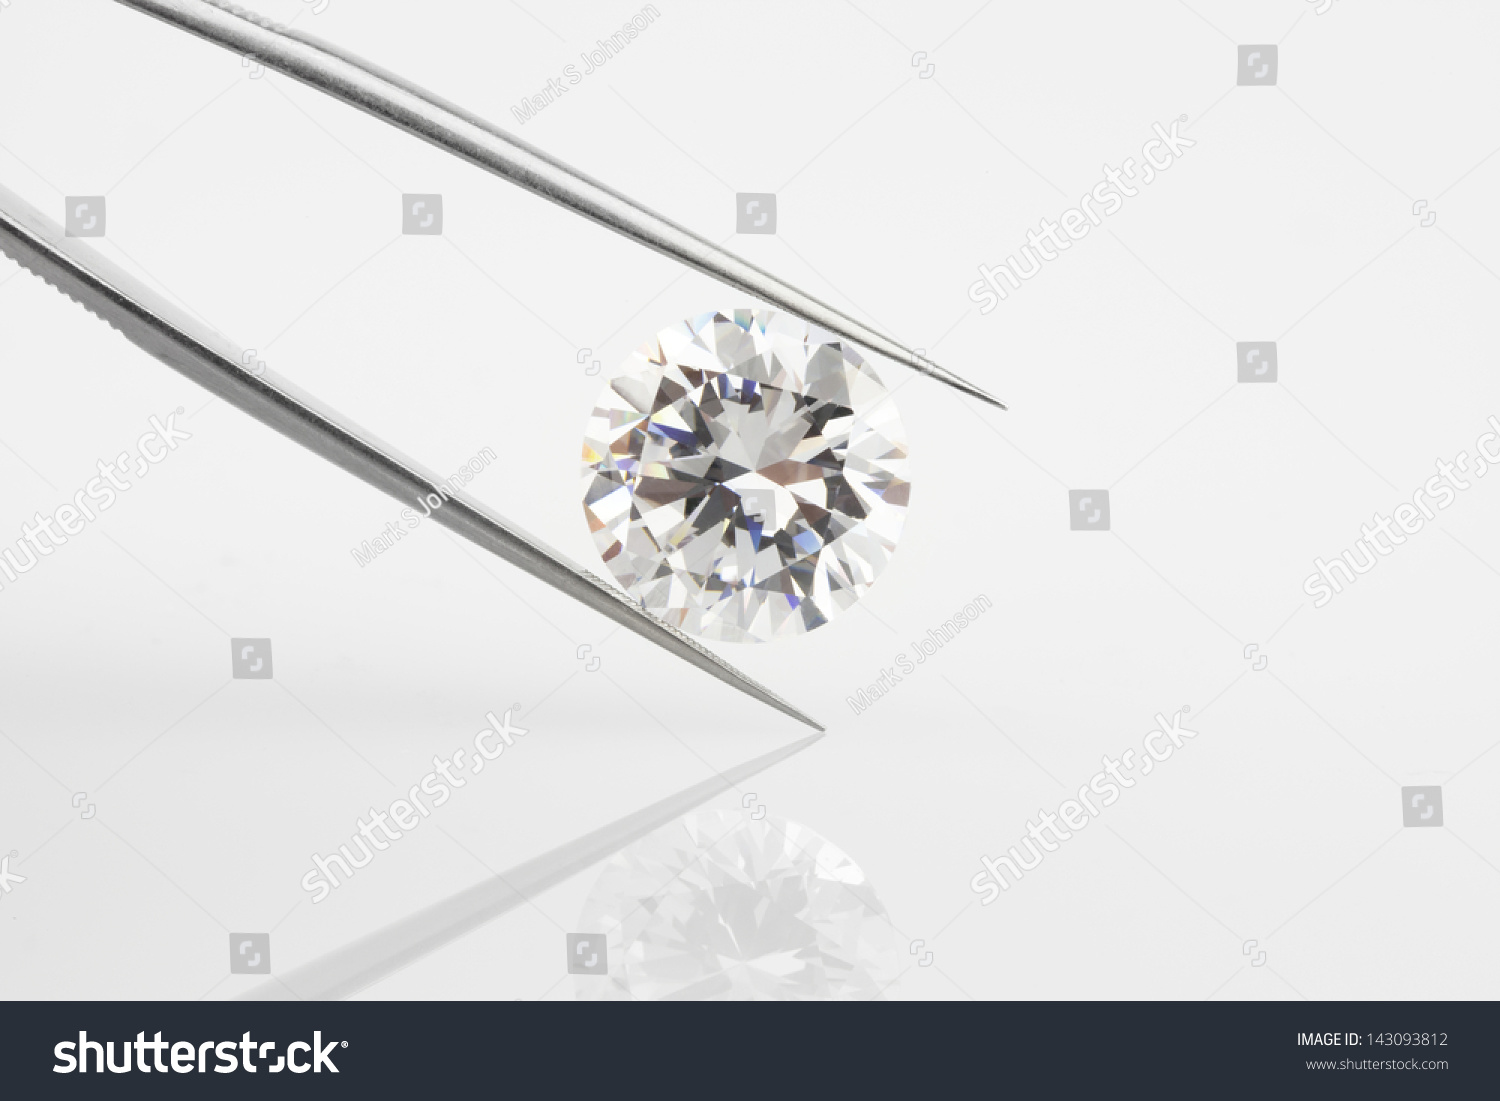 Diamond held within tweezers. Large round diamond, angled and reflected on pale background. #143093812